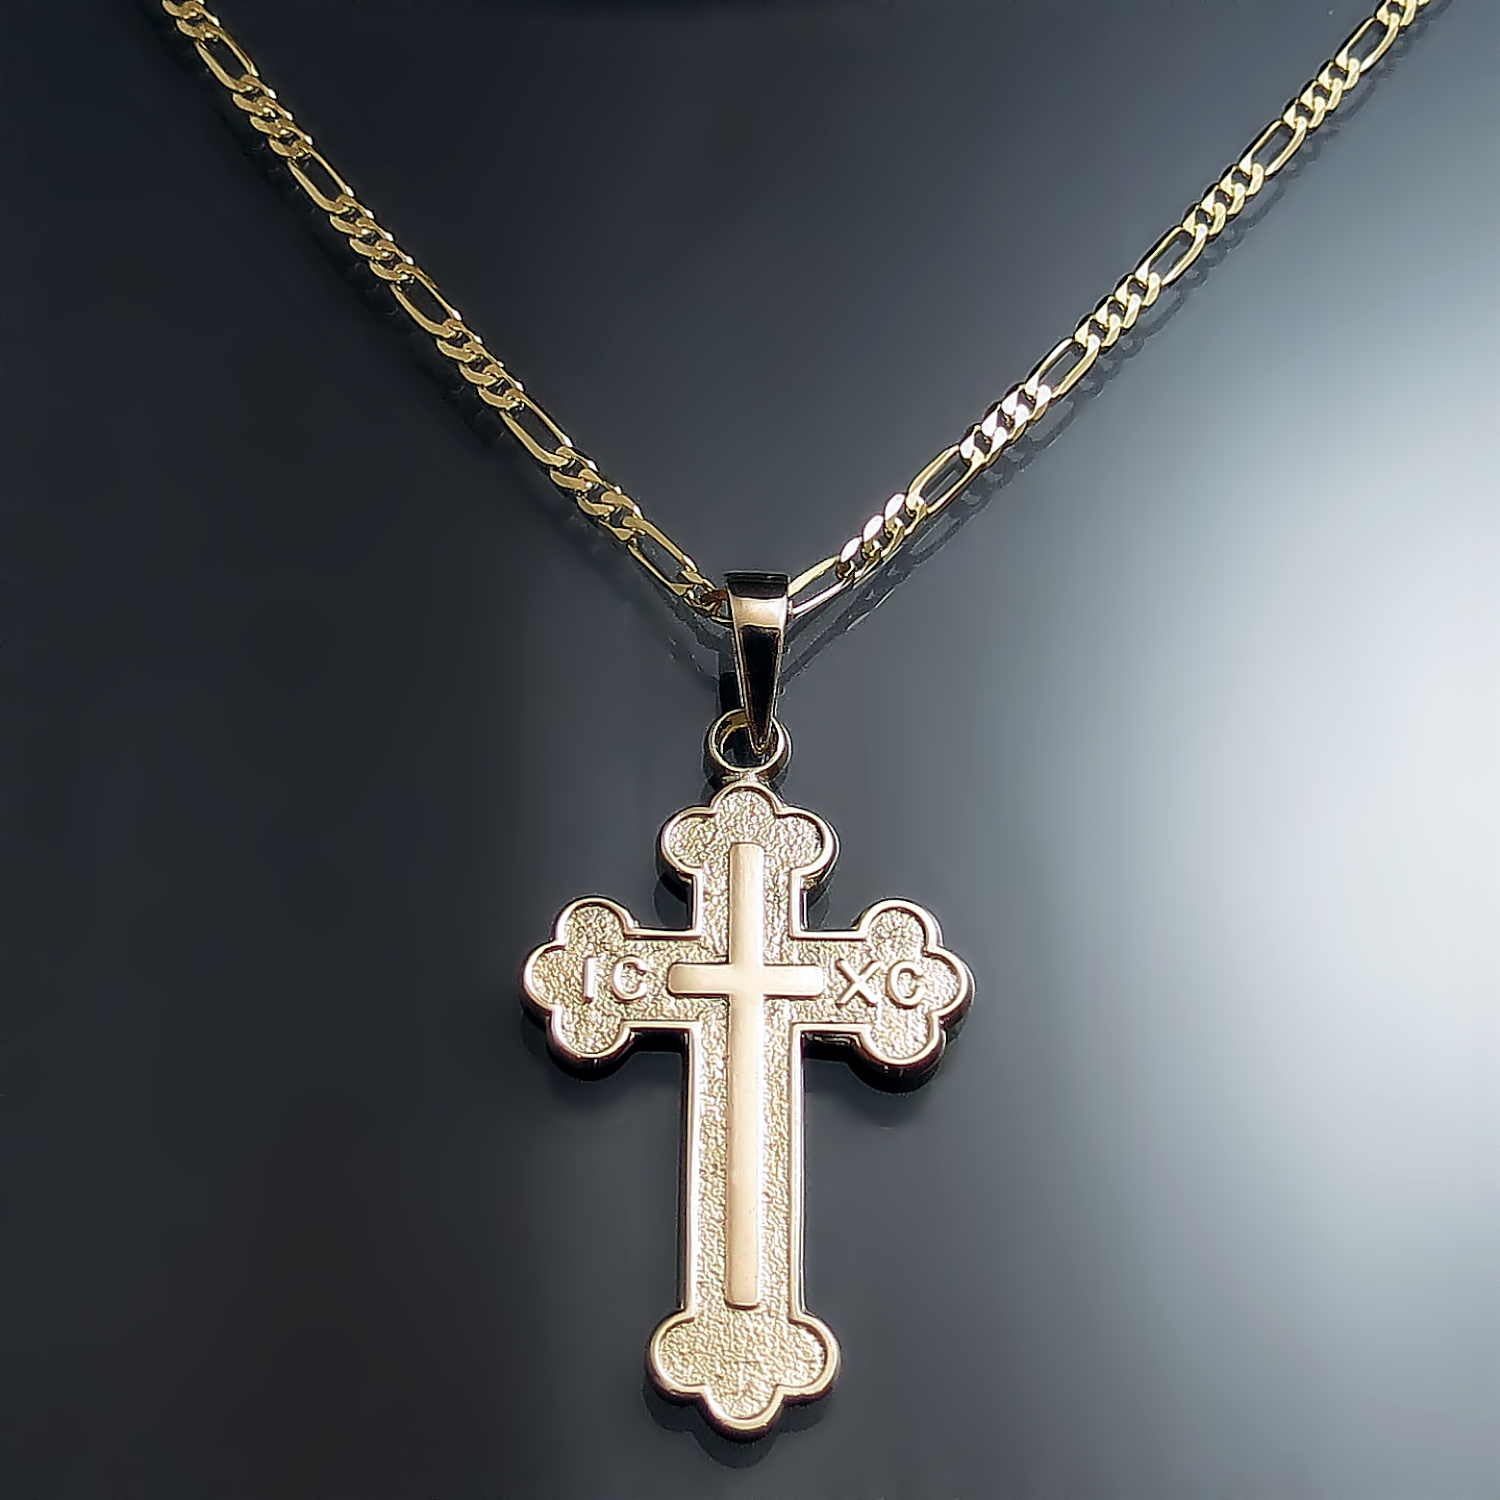 2 Ct Lab Created Diamond Cross Pendant Necklaces 14k Yellow Gold Plated  Silver | eBay